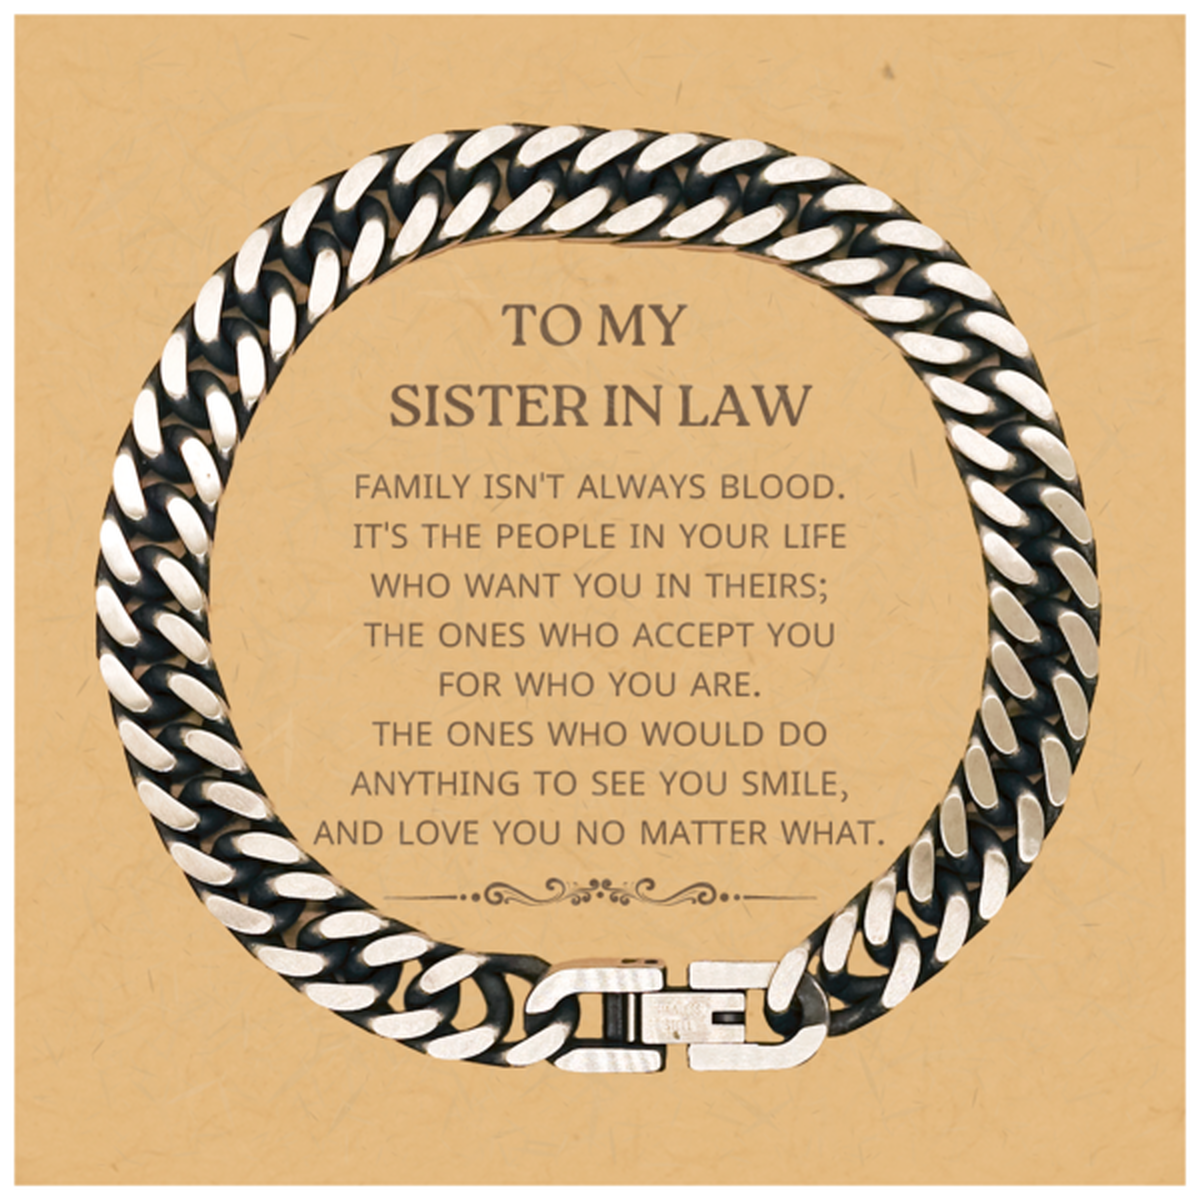 To My Sister In Law Gifts, Family isn't always blood, Sister In Law Cuban Link Chain Bracelet, Birthday Christmas Unique Present For Sister In Law